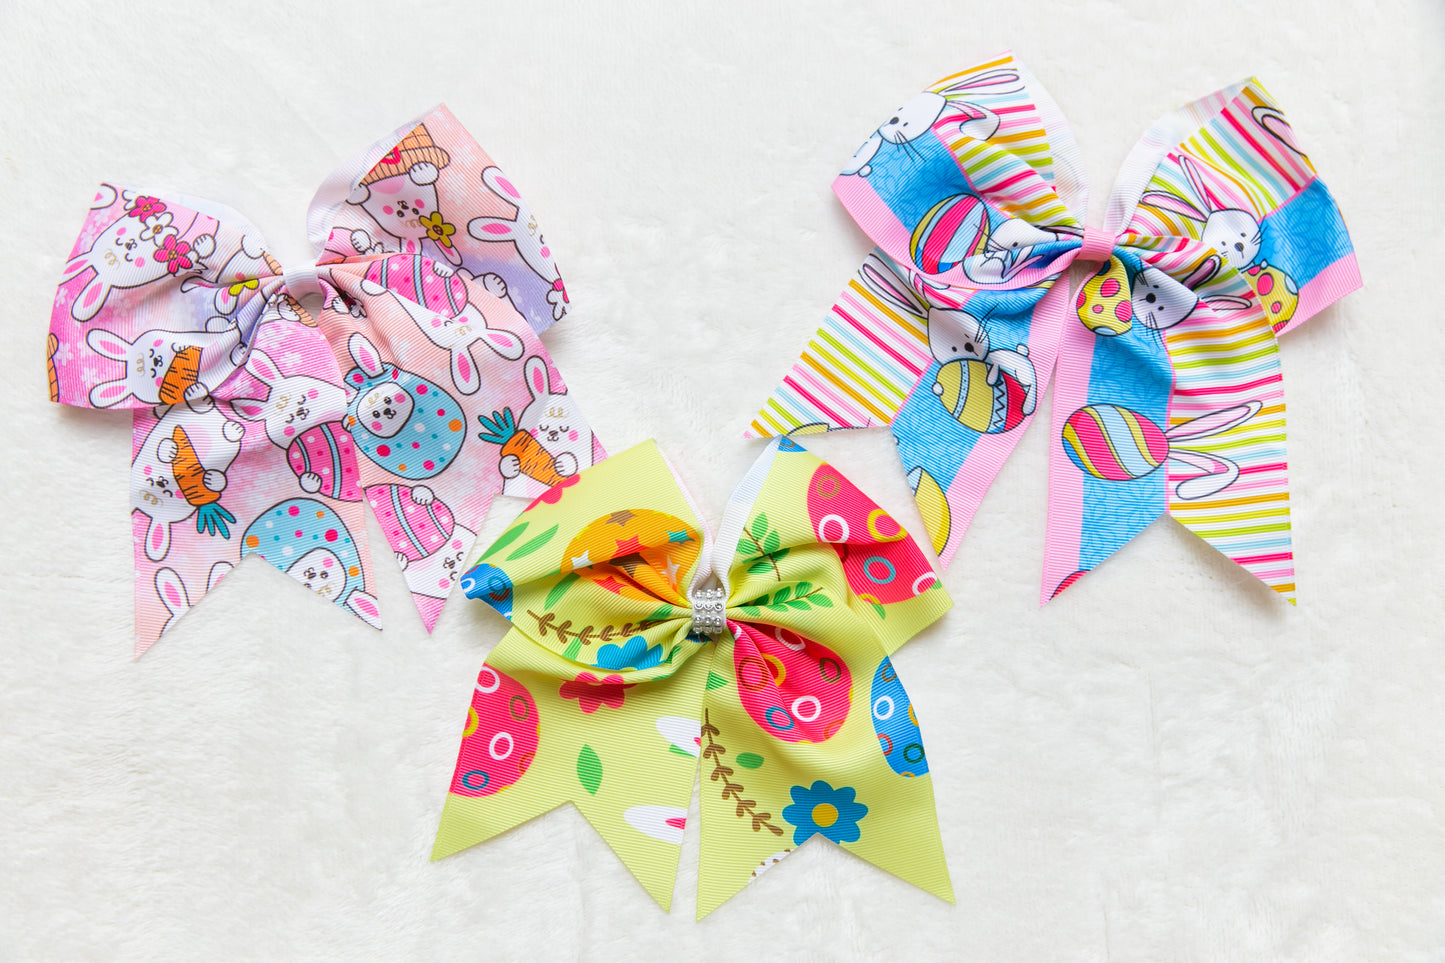 Unique Easter 7 inches Extra Large Bow Hair Tie for Toddler Girl Teen Pink Blue Yellow Easter Egg and Bunny Design Big ribbon Bow party gift